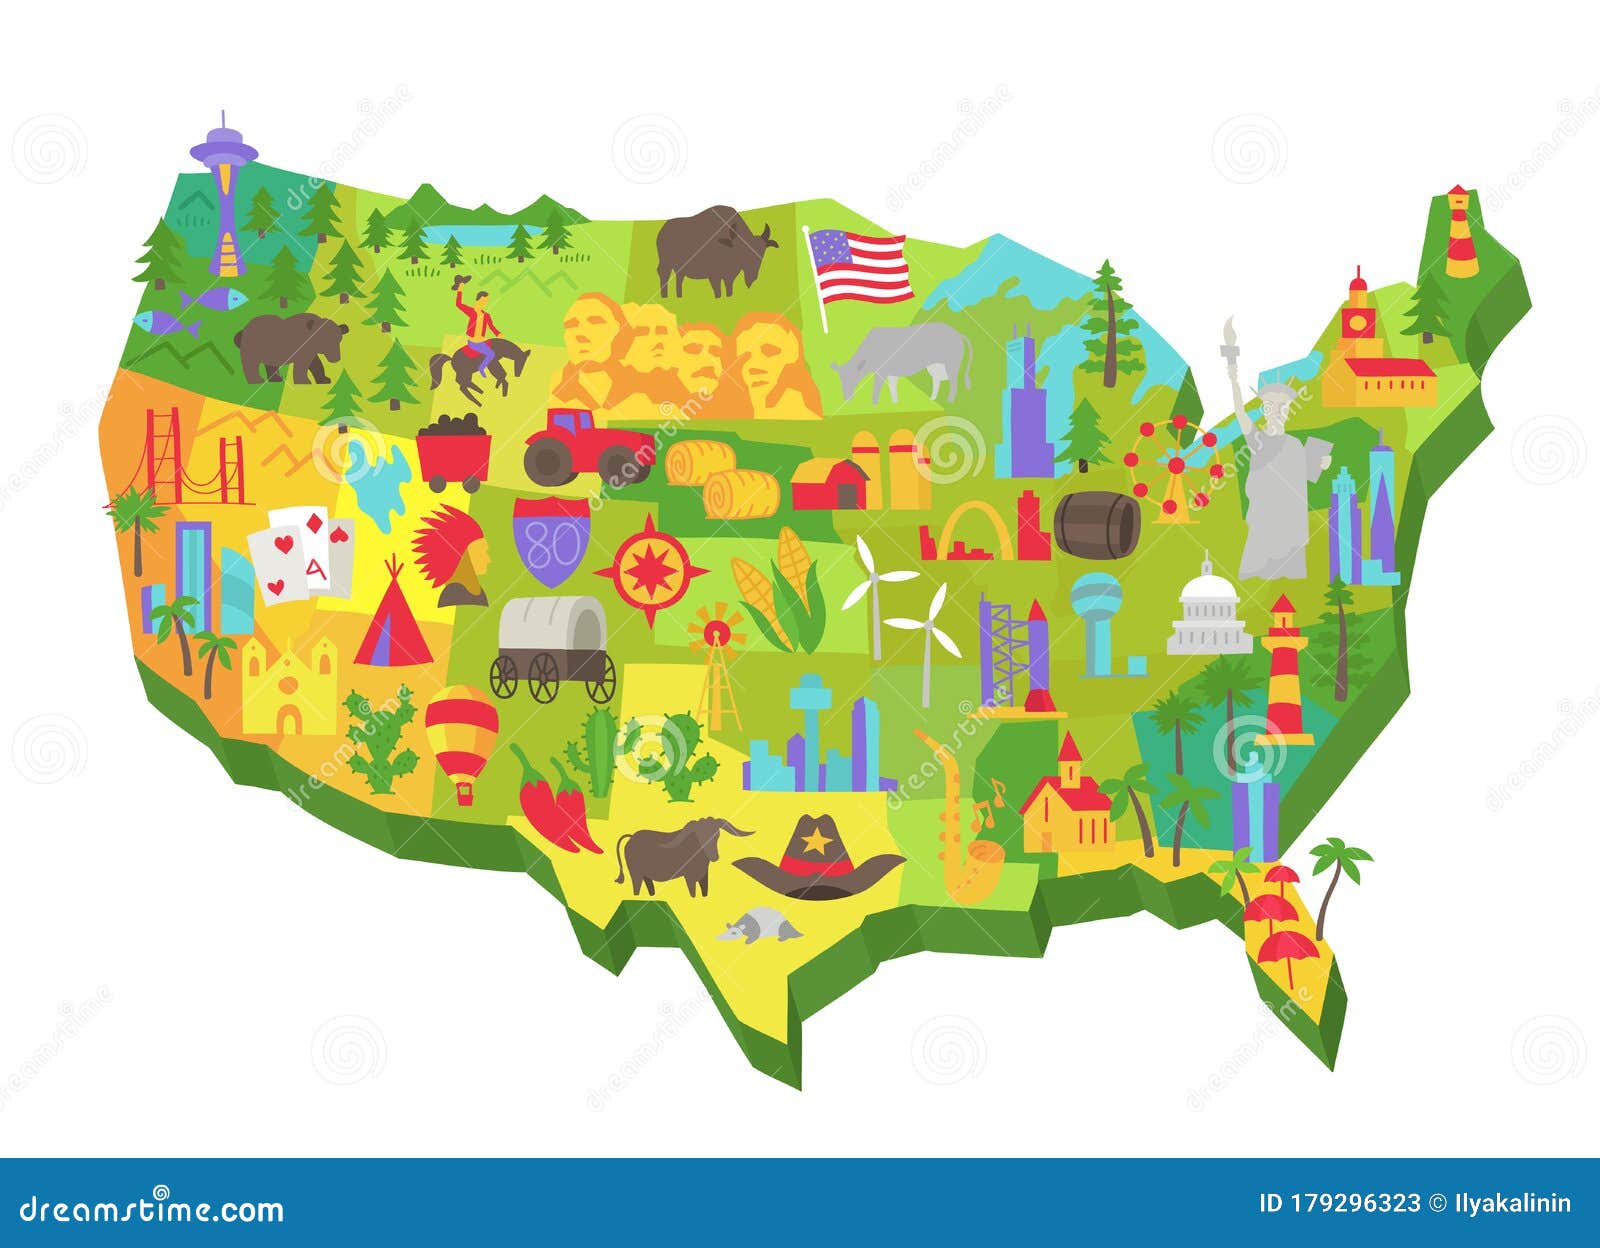 illustrated usa tourist attraction on the map. united states of america. set of icons. showplace flat .